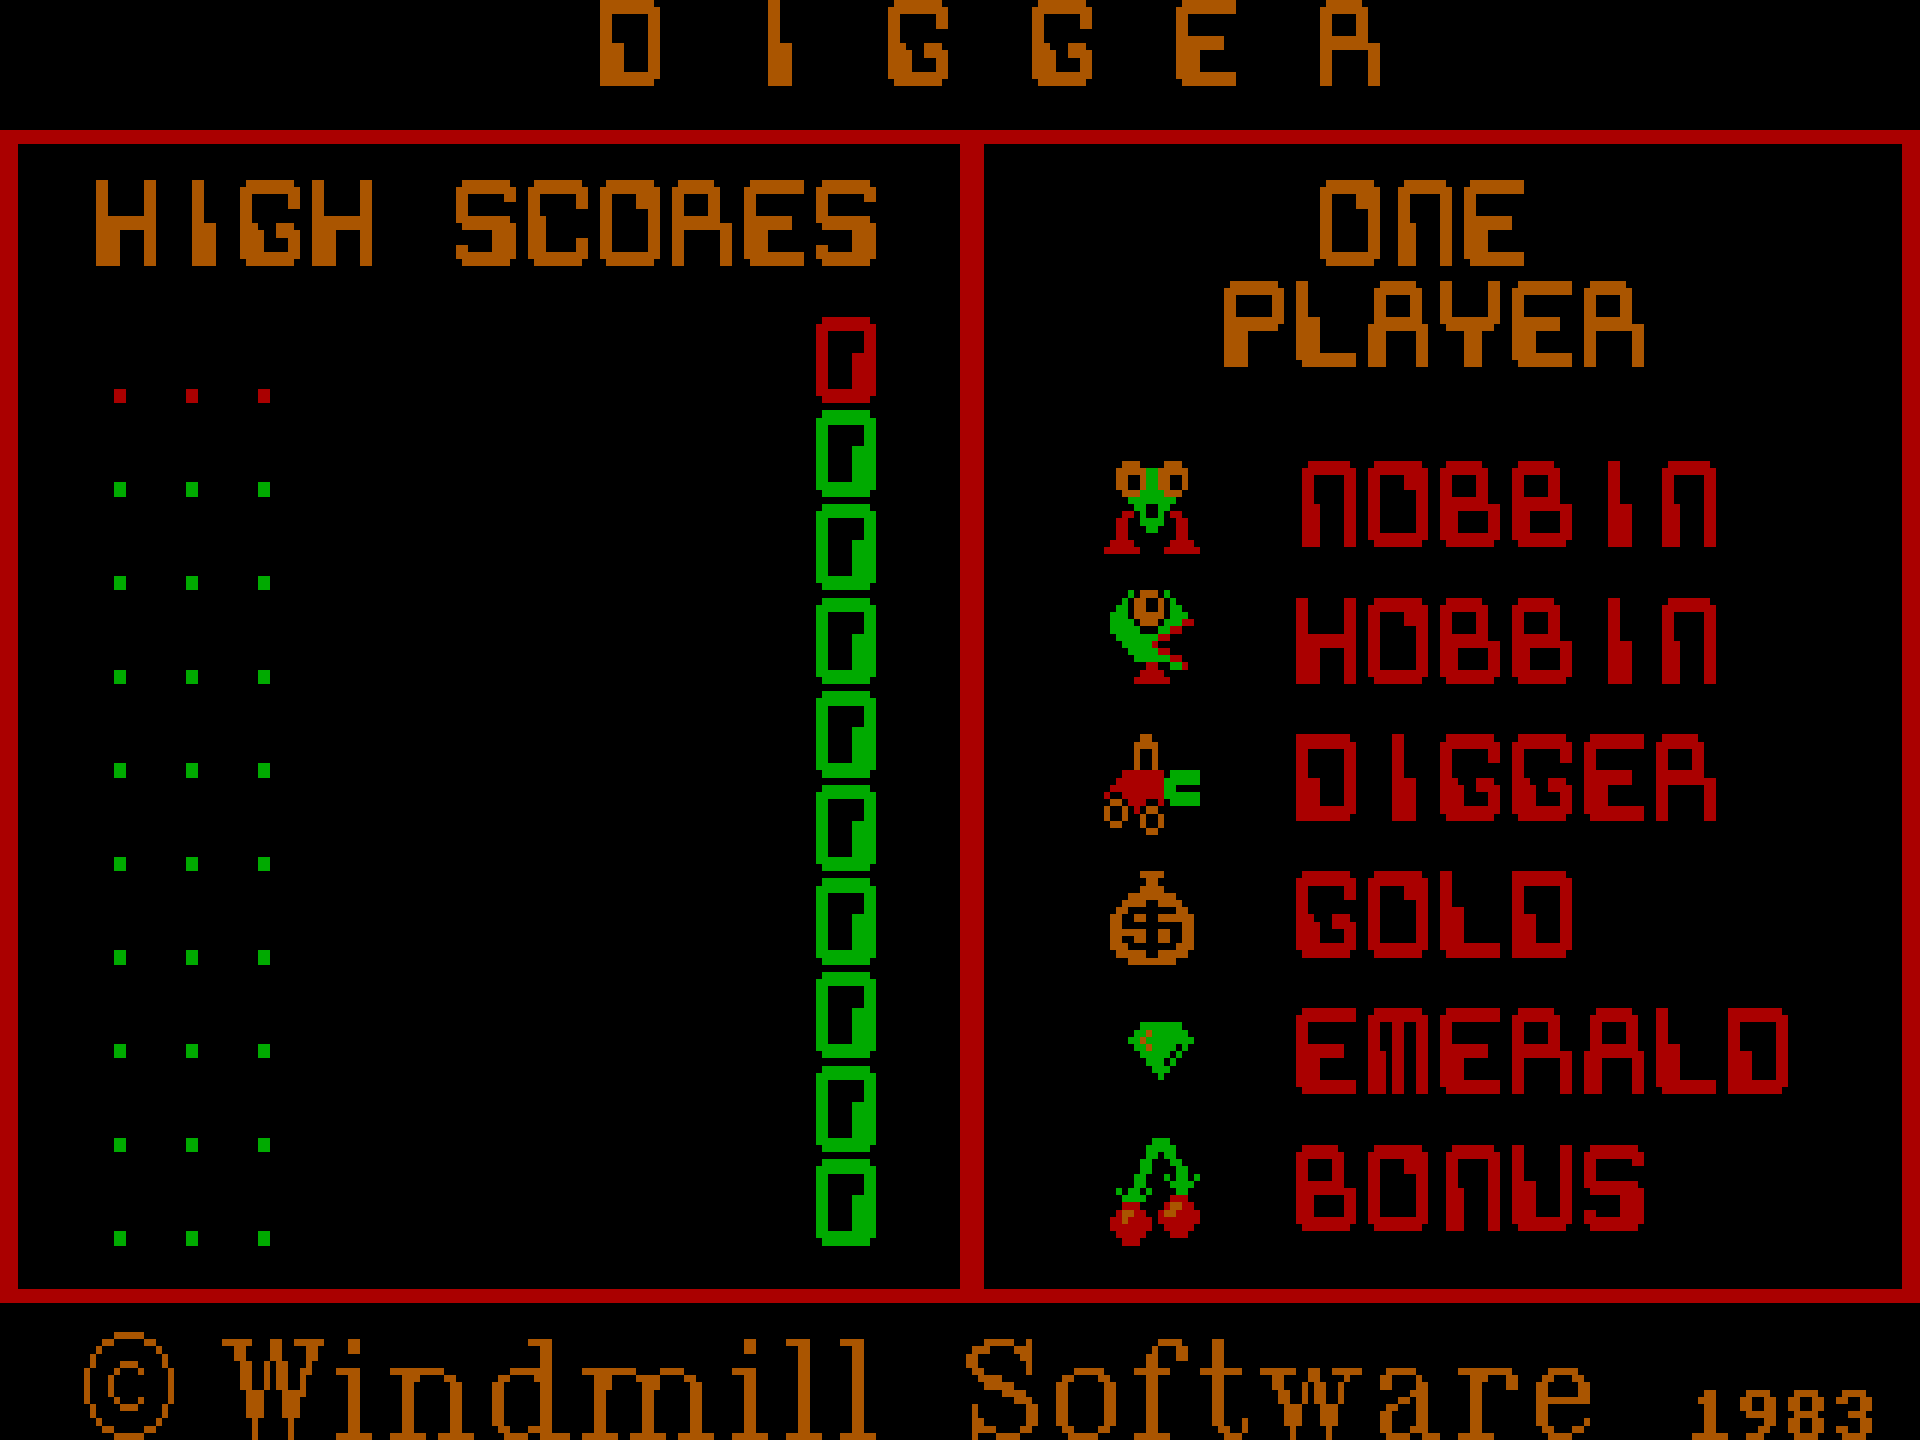 A screenshot of Digger welcome screen with the names and pictures of various game characters with a copyright notice of Windmill Software